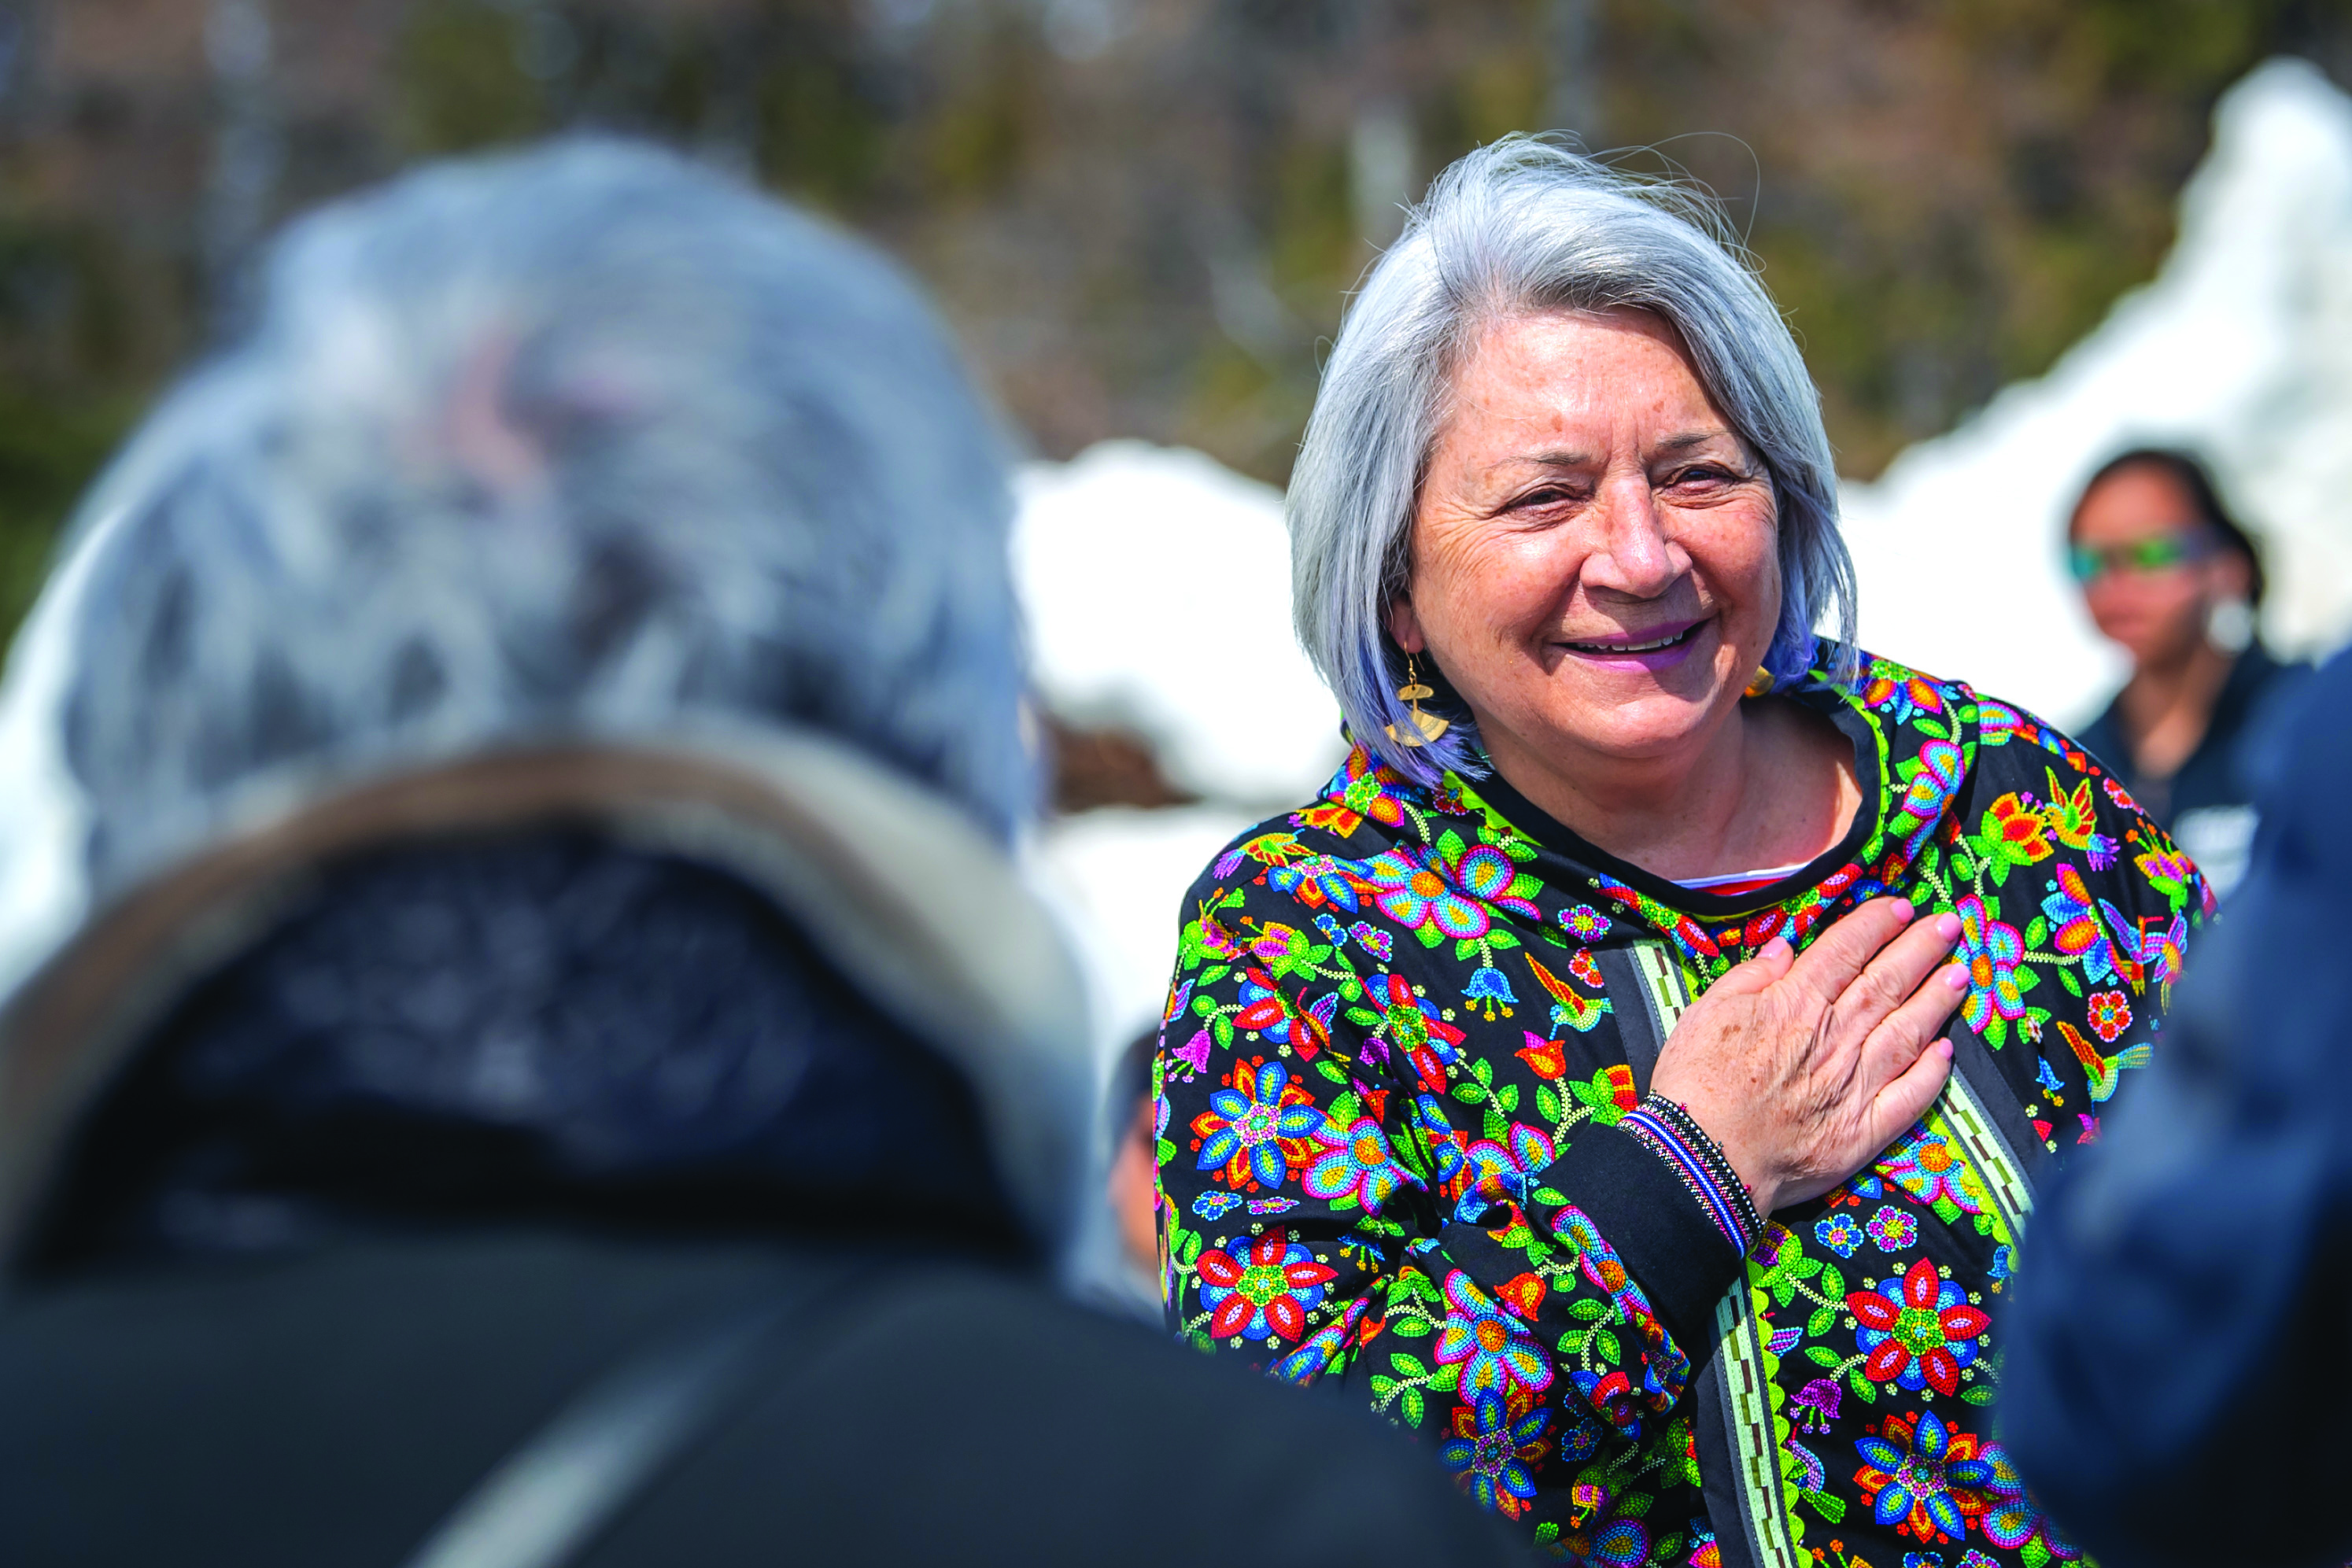 Mary Simon in Kuujjuaq in May 2022. (Photo by Sgt. Mathieu St-Amour/Rideau Hall)